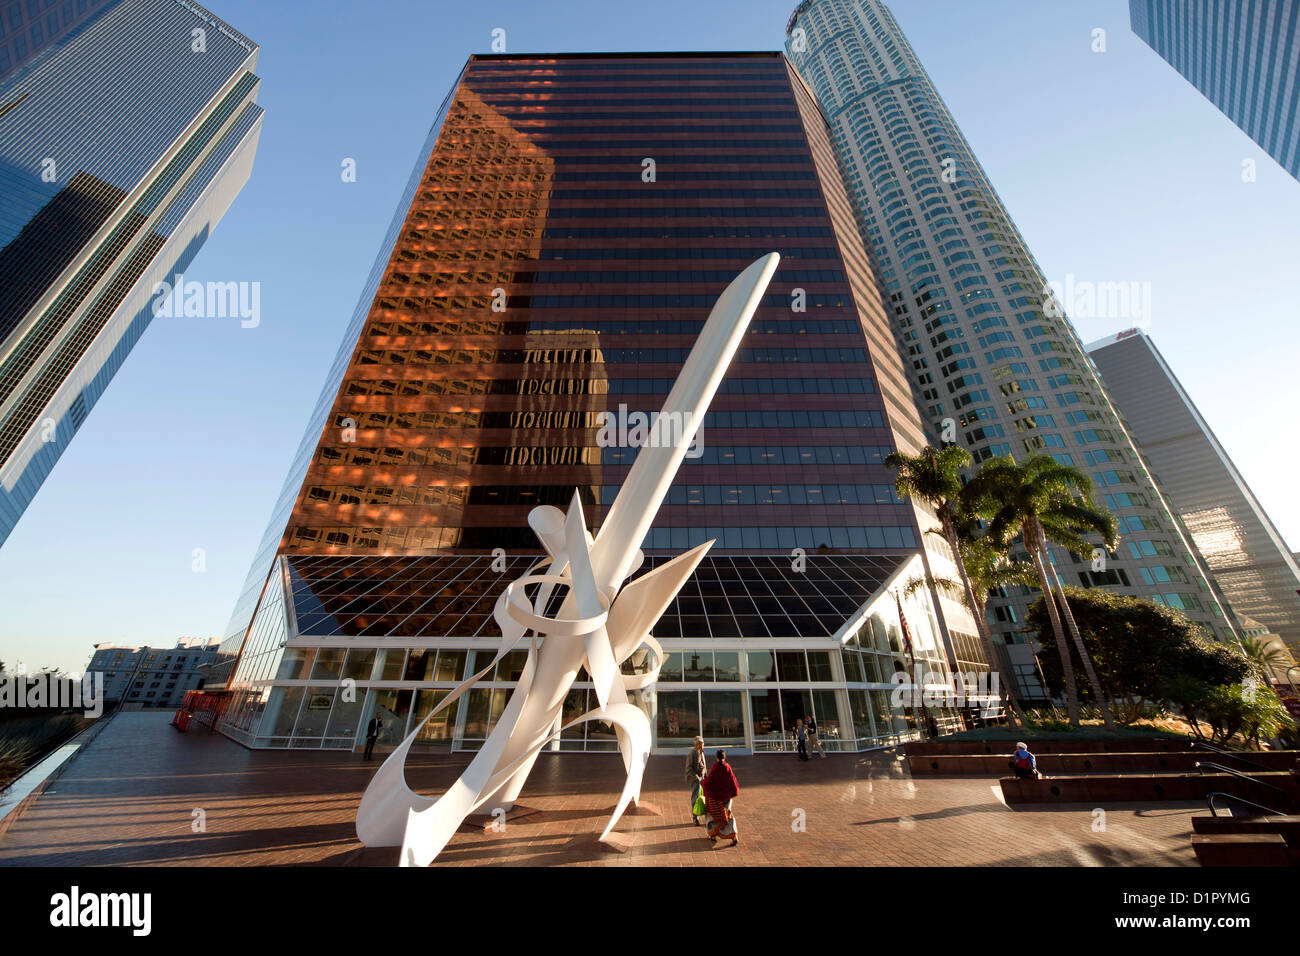 Worm's-eye view of Downtown Los Angeles skyscrapers and sculpture “Ulysses” by Alexander Lieberman, California, USA Stock Photo